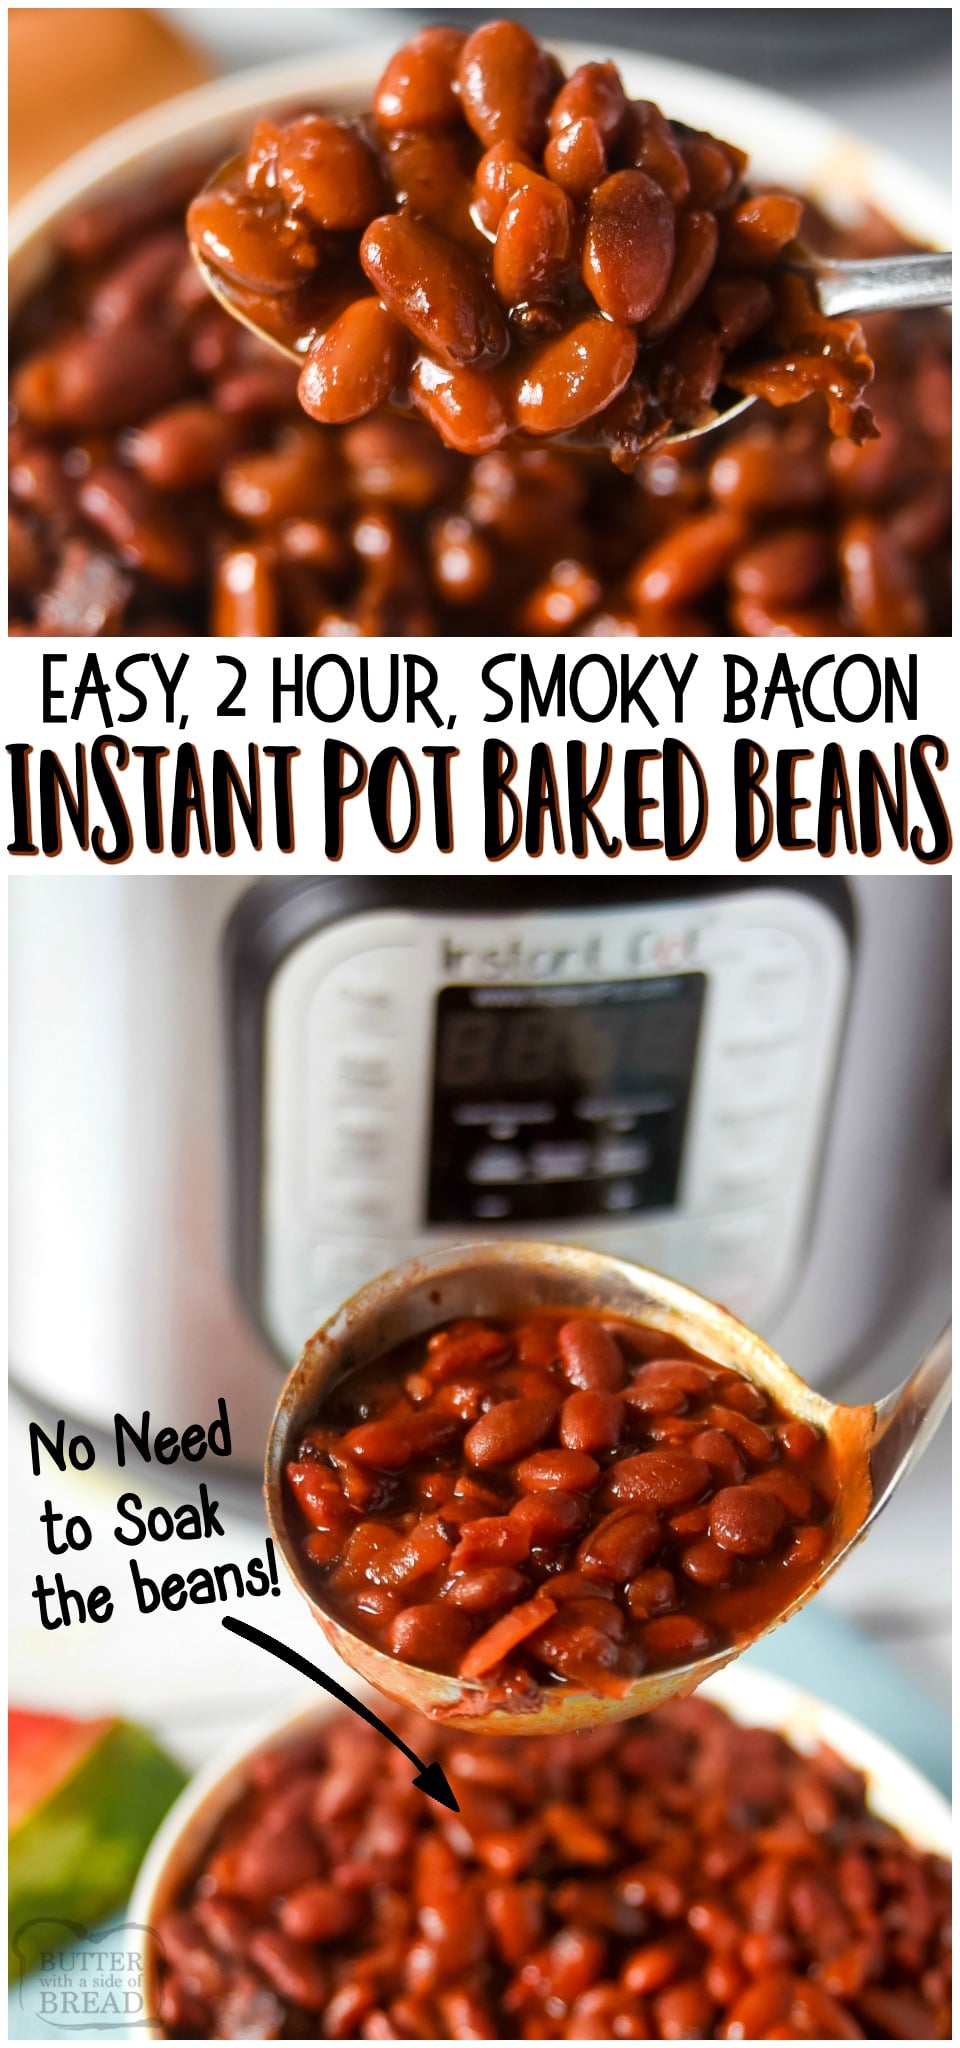 Easy Instant Pot Smoky Baked Beans are made with dry pinto beans (no soaking!), bacon, onion and spices! Hearty, flavorful baked bean recipe that tastes like it's been slow cooking for days, even though it's done in 2 hours! #instantpot #bakedbeans #beans #bacon #smoky #recipe from BUTTER WITH A SIDE OF BREAD